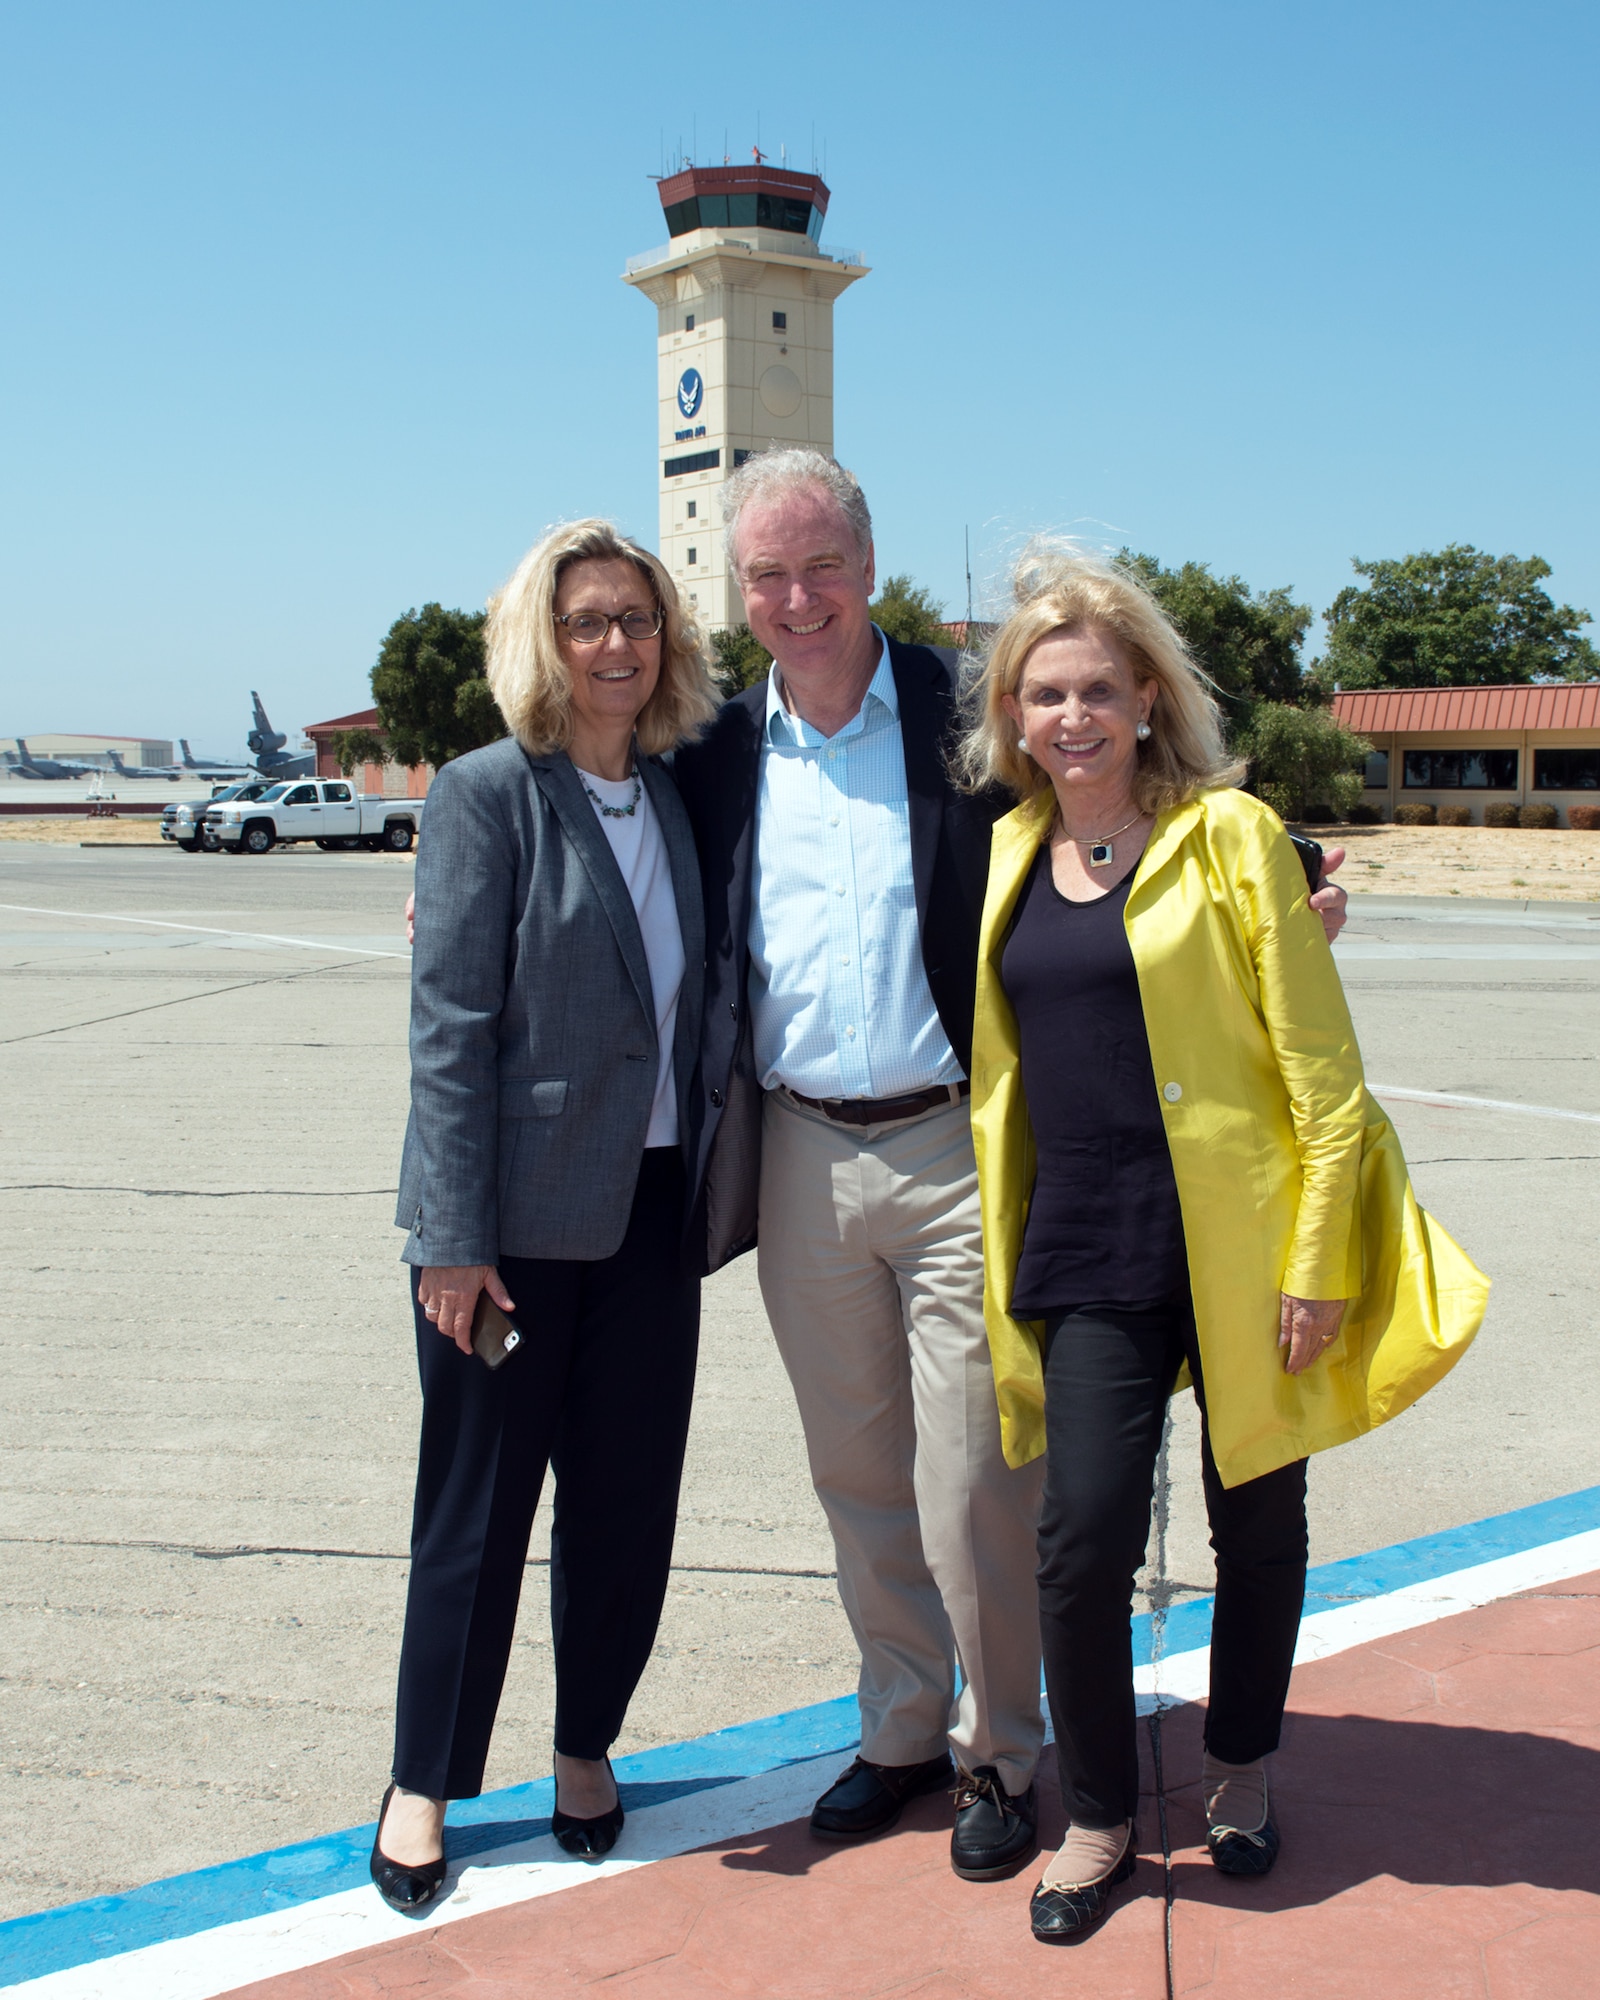 From left Katherine Wilkins, spouse of Chris Van Hollen, U.S. Senator for Maryland, and Congresswoman Carolyn Maloney pose for a photo at Travis Air Force Base, Calif., August 16, 2017. Van Hollen and Maloney are part of a congressional delegation that stopped at Travis en route to Joint Base Pearl Harbor-Hickam. (U.S. Air Force photo by Louis Briscese)